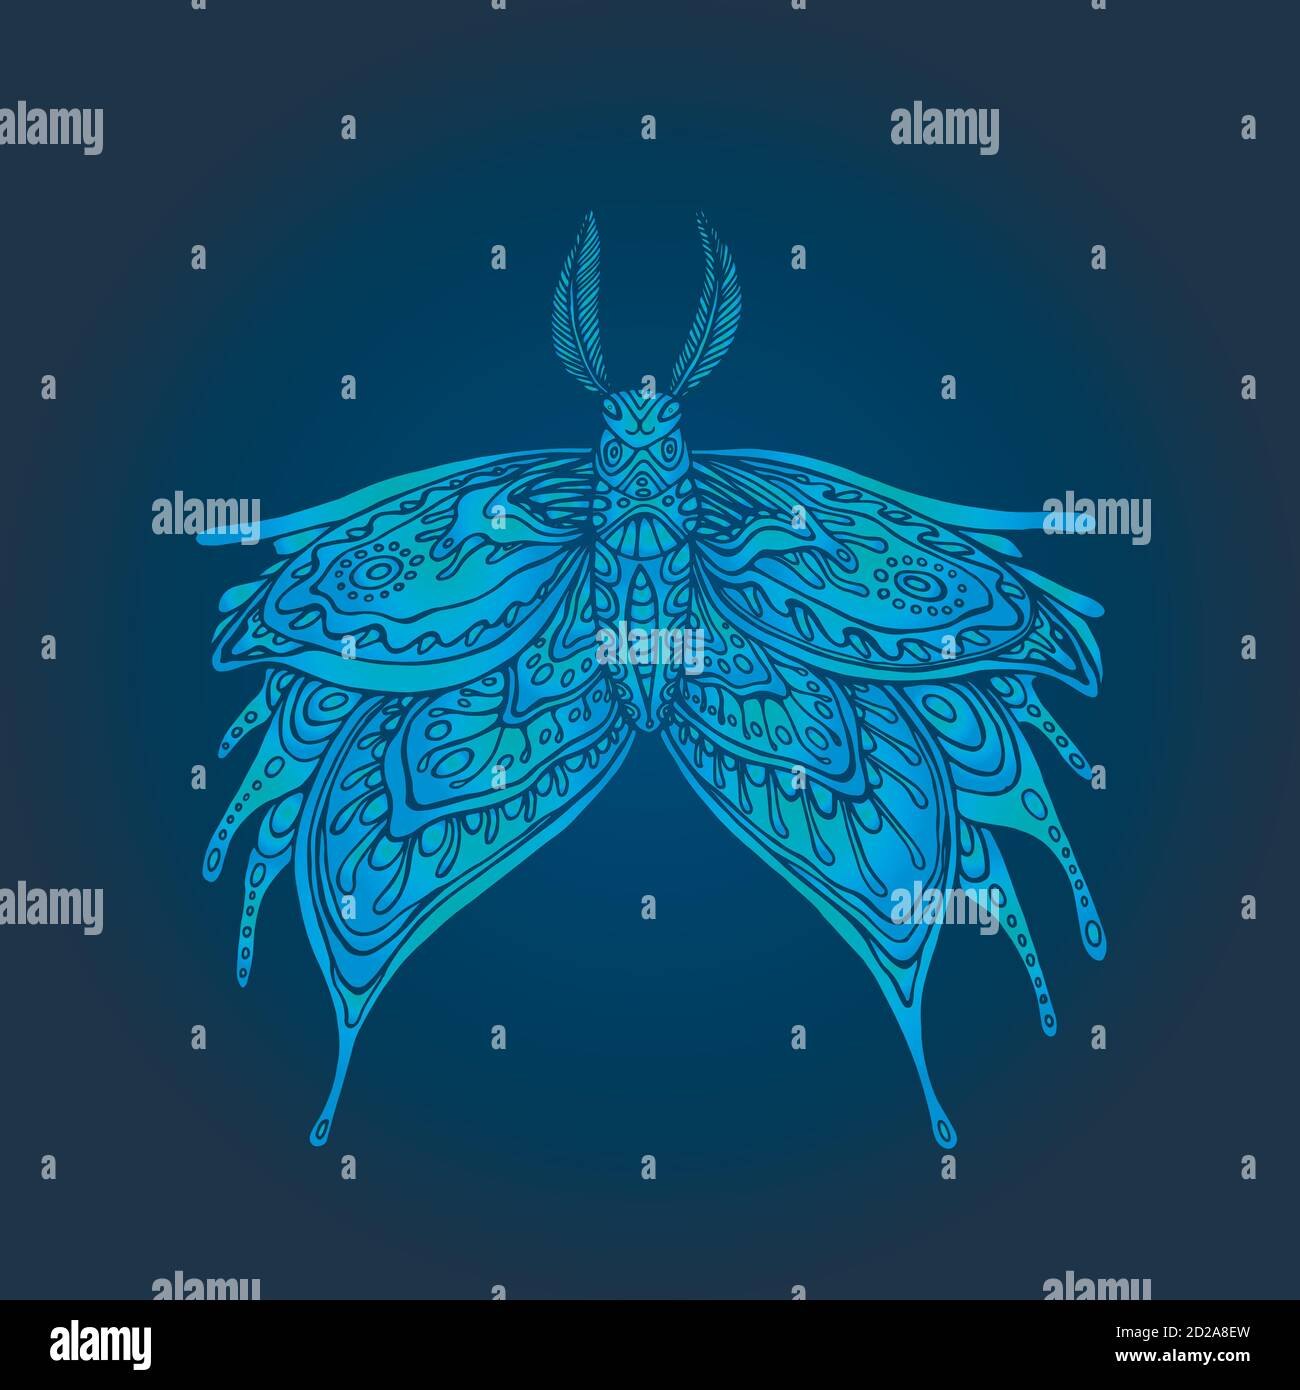 Mystical winter Stock Vector Images - Alamy